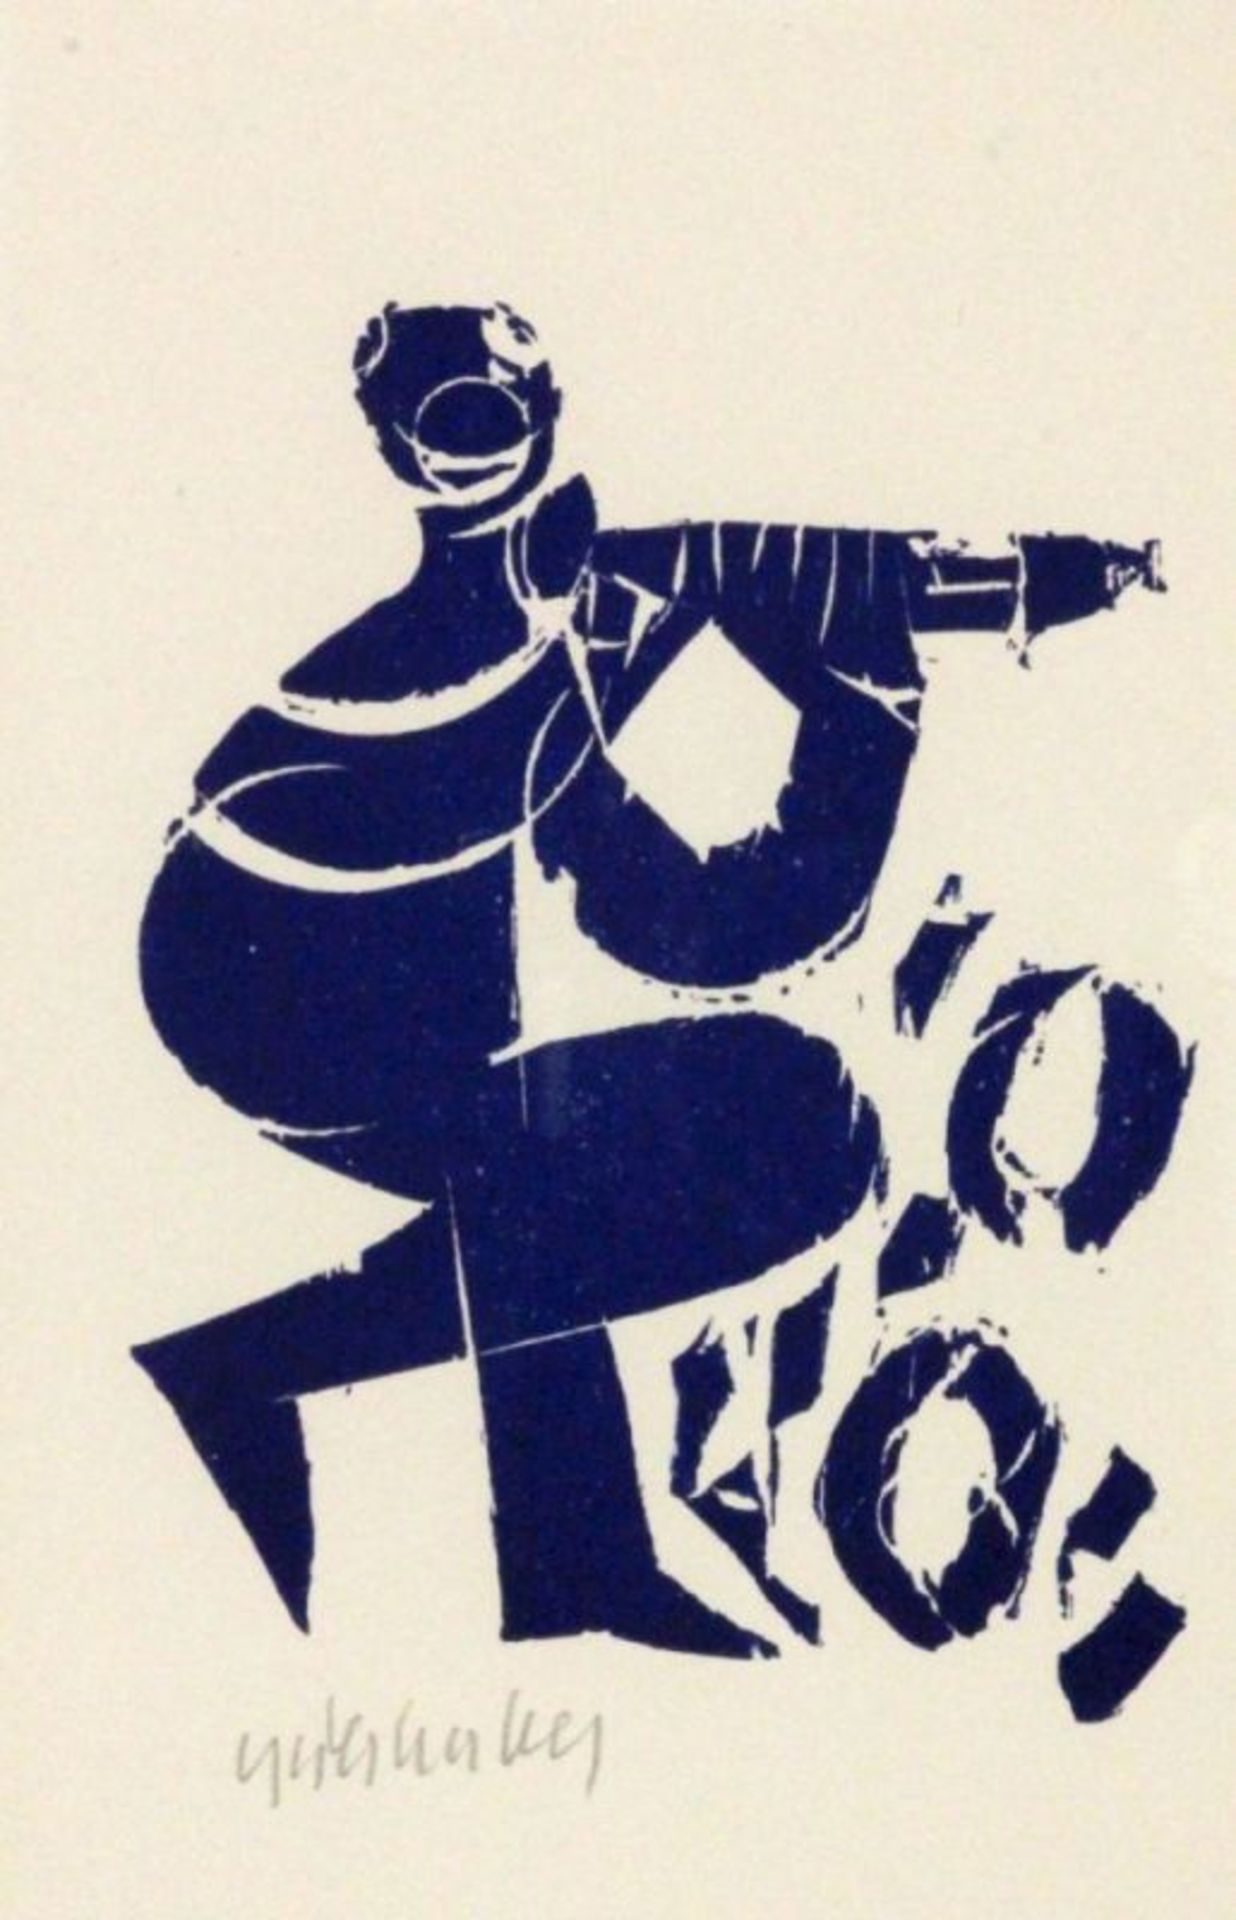 GRIESHABER, HAP Rot an der Rot 1909 - 1981 Achalm Pan. Woodcut, blue, 1980. Hand signed.